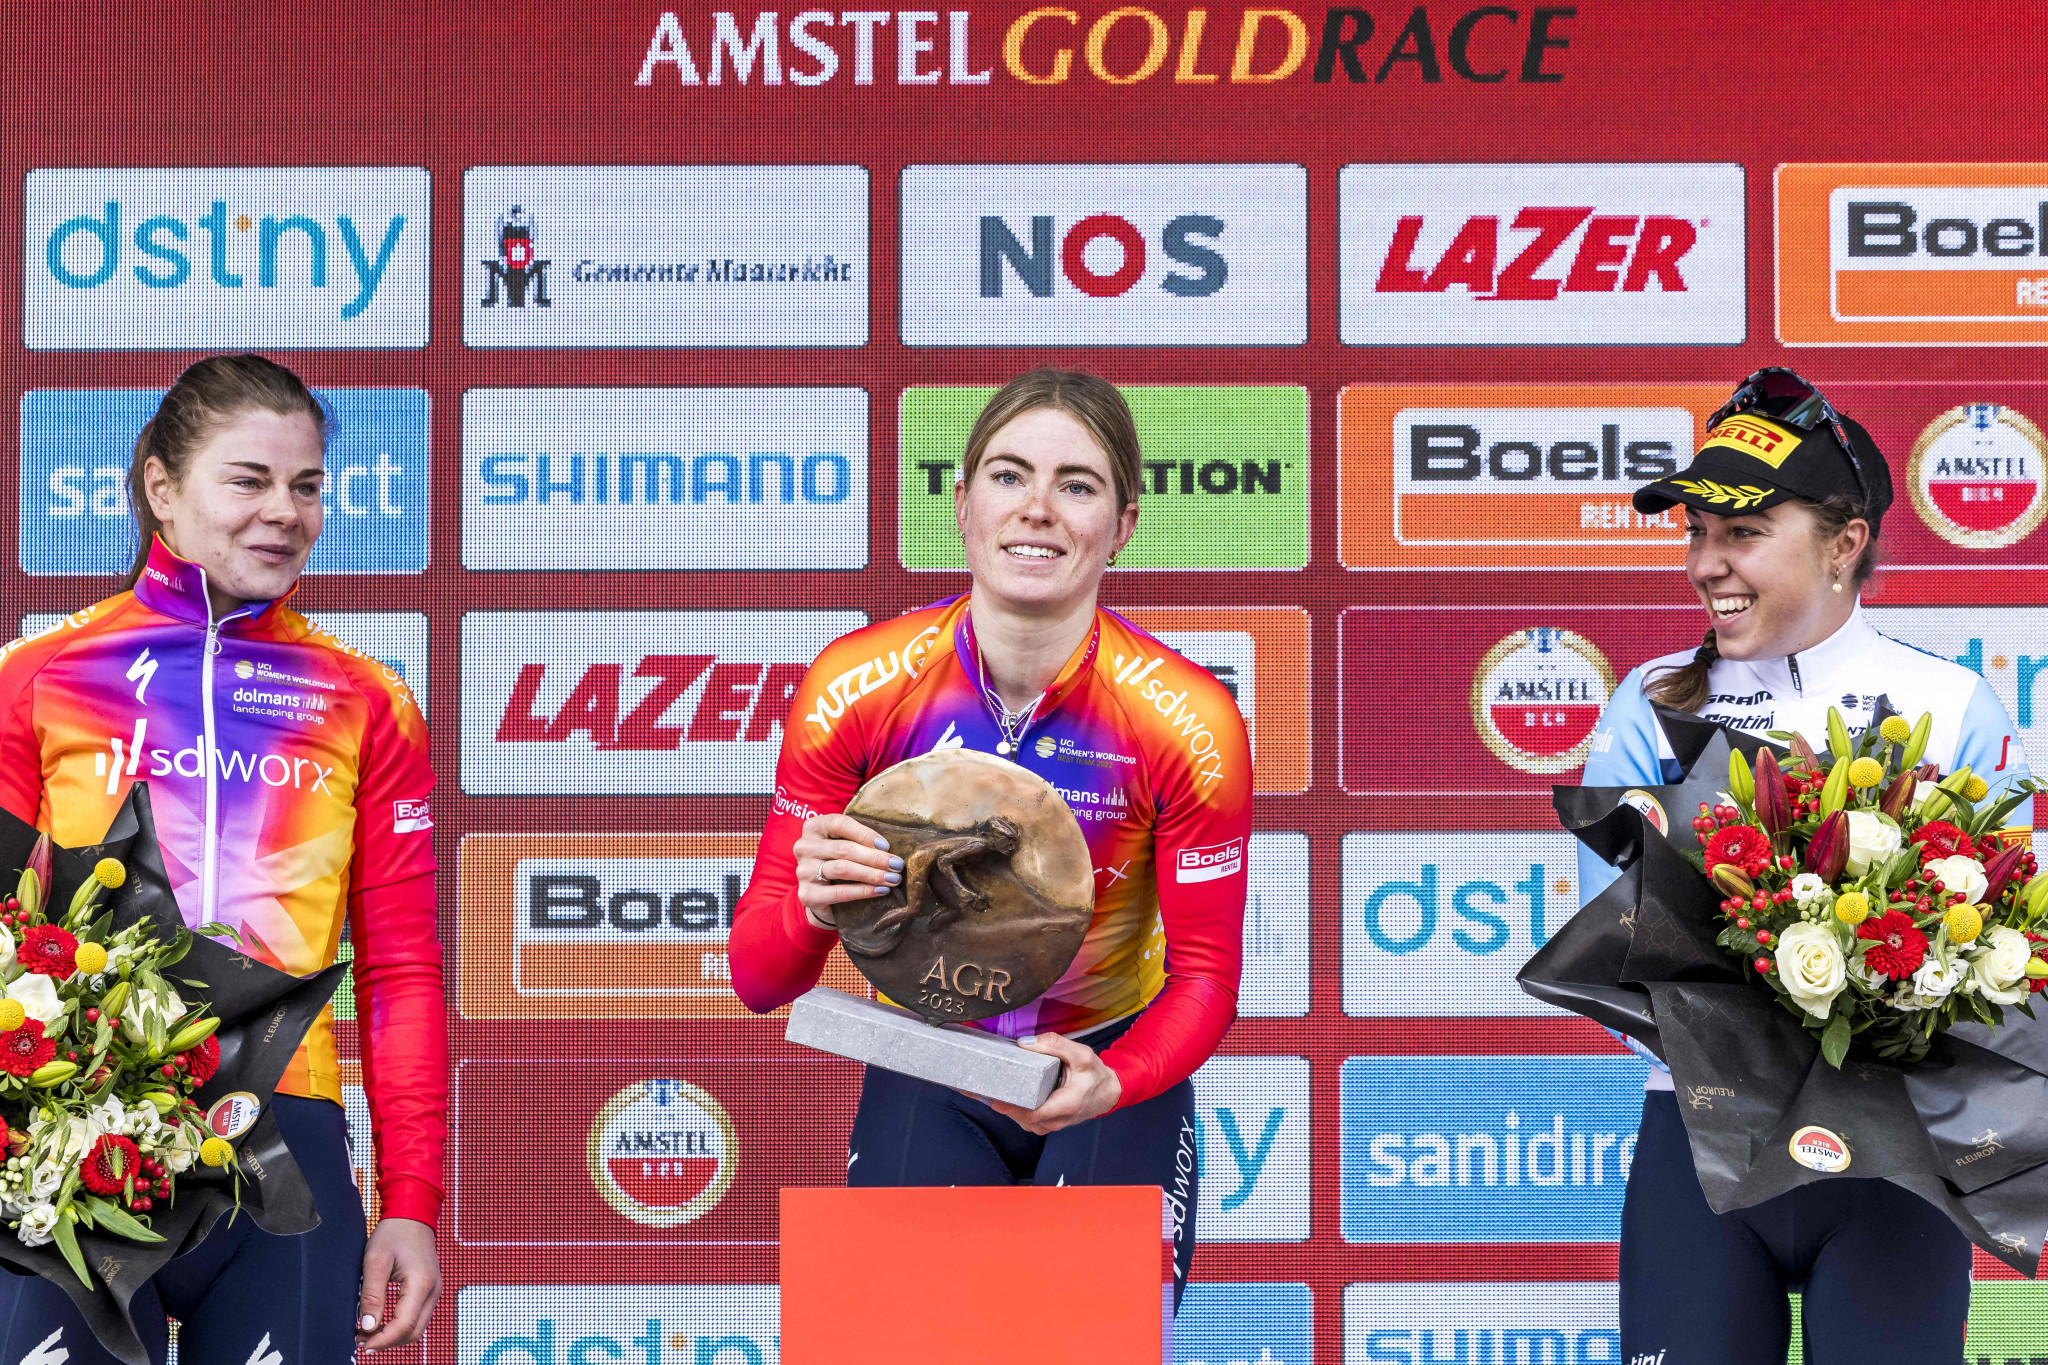 Demi Vollering, centre, placed first in the Amstel Gold Race after finishing second for the past two years ©Getty Images